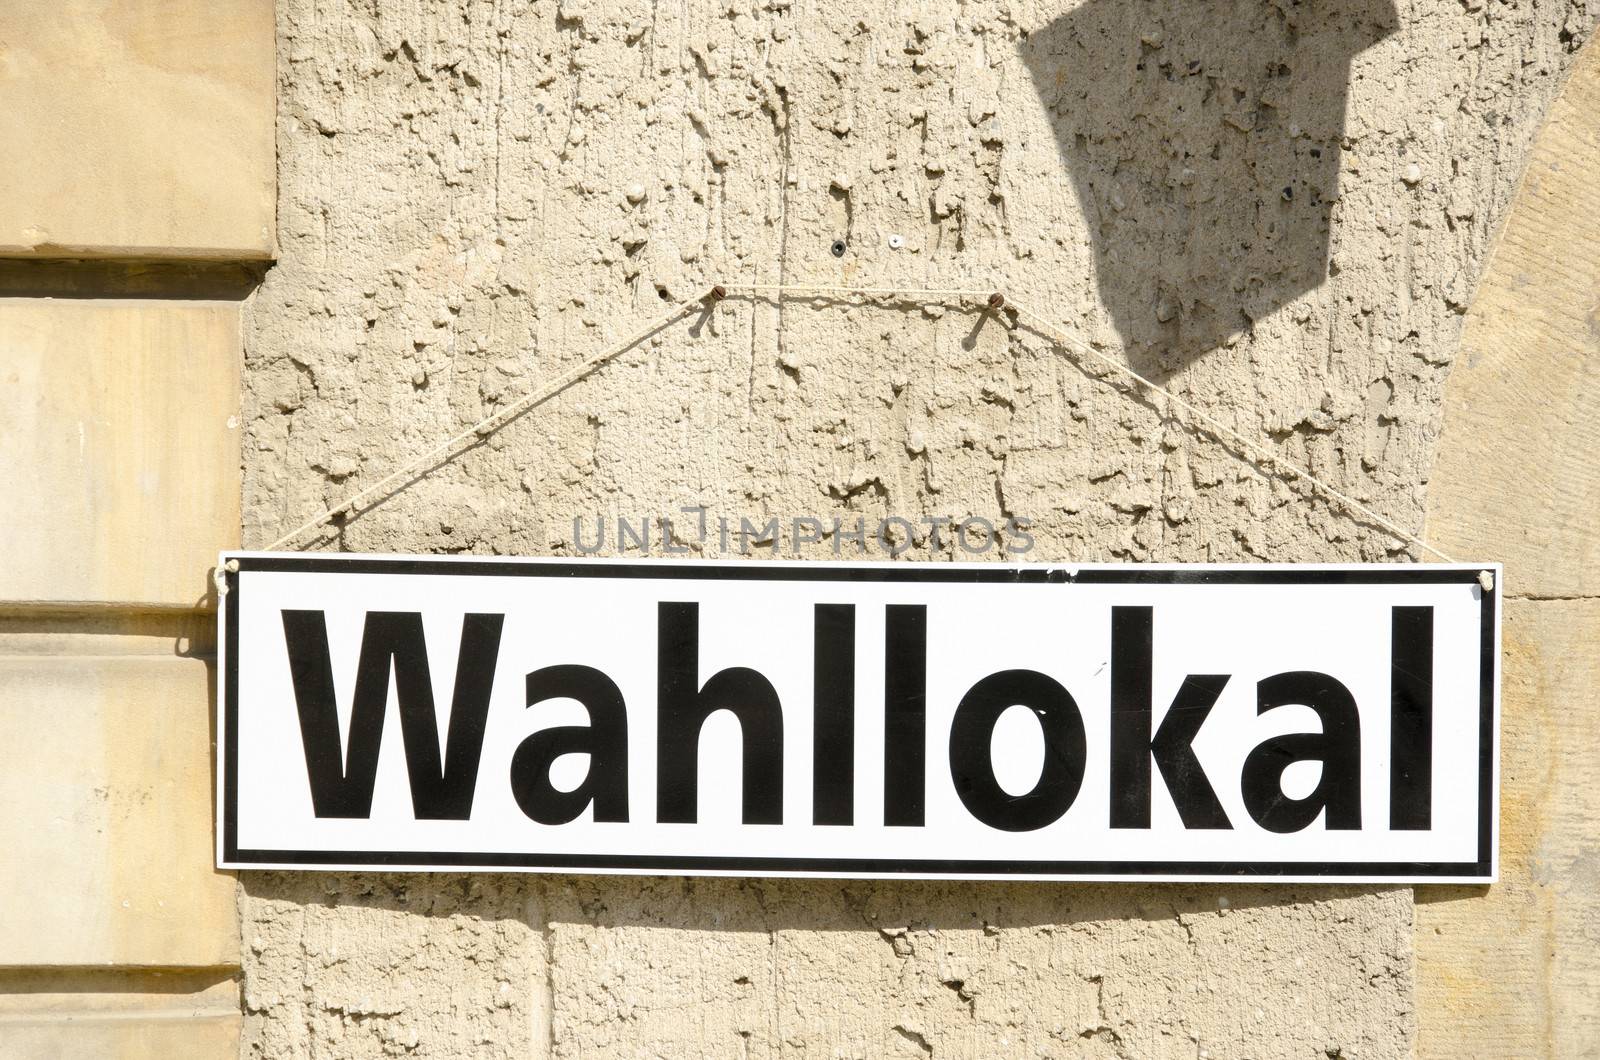 German sign for elections on a house wall, Wahllokal